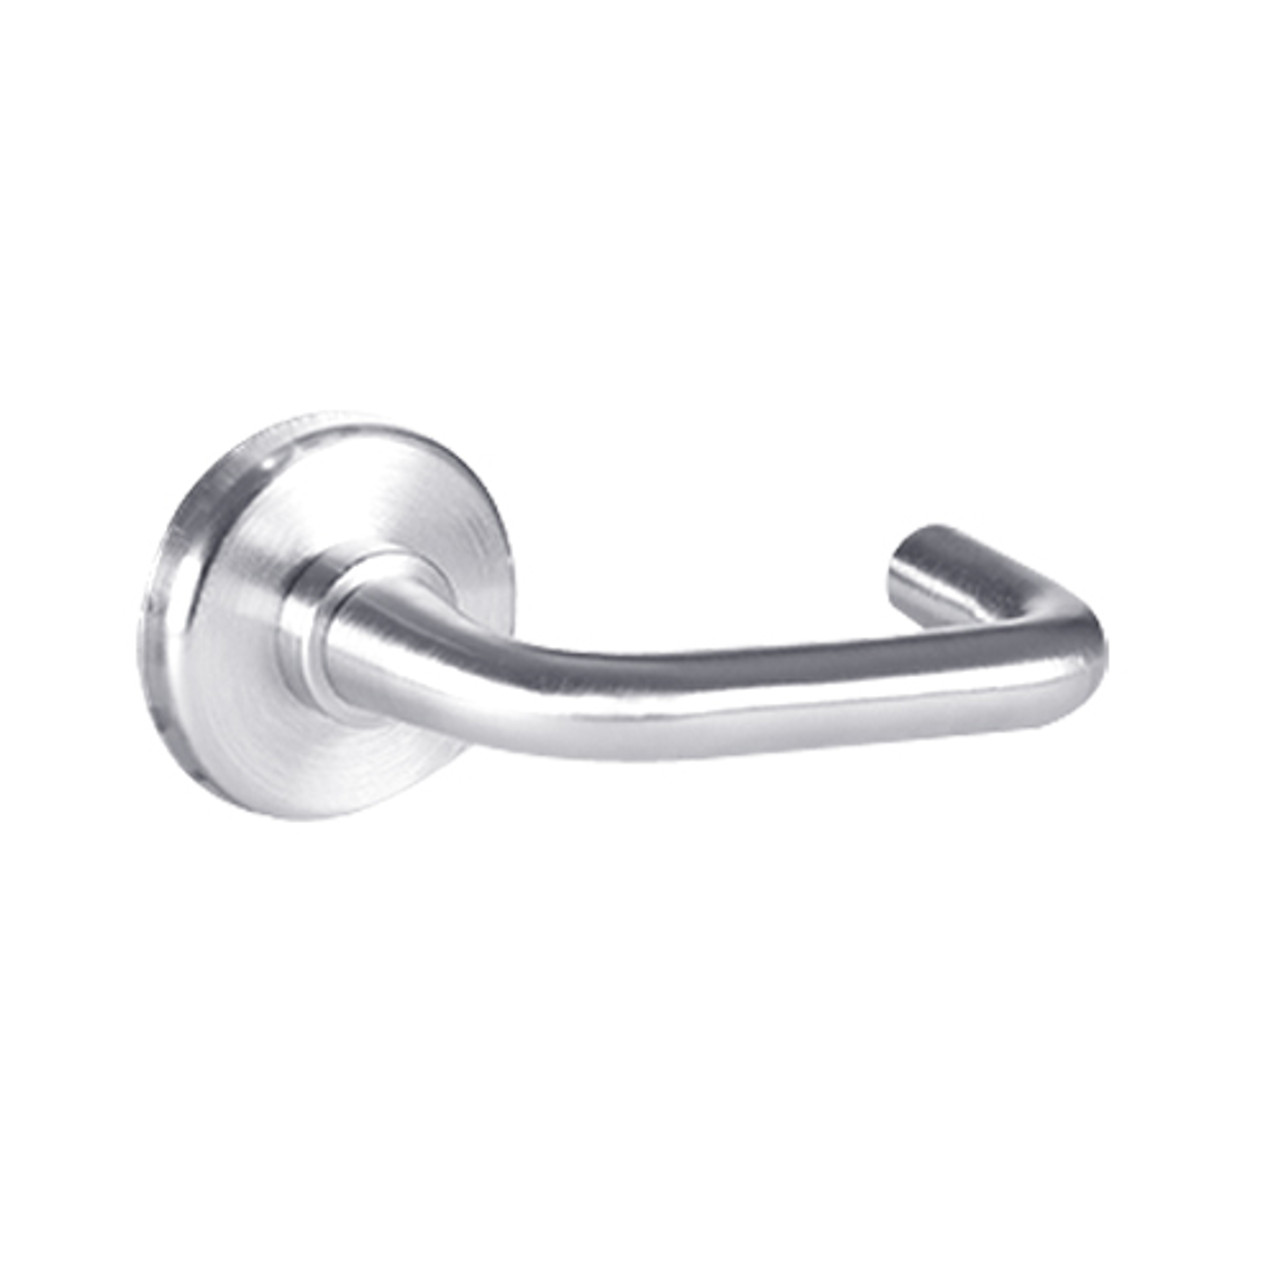 40HTKIS13H625 Best 40H Series Trim Kits Inside Lever Only with Solid Tube-Return Trim Style in Bright Chrome